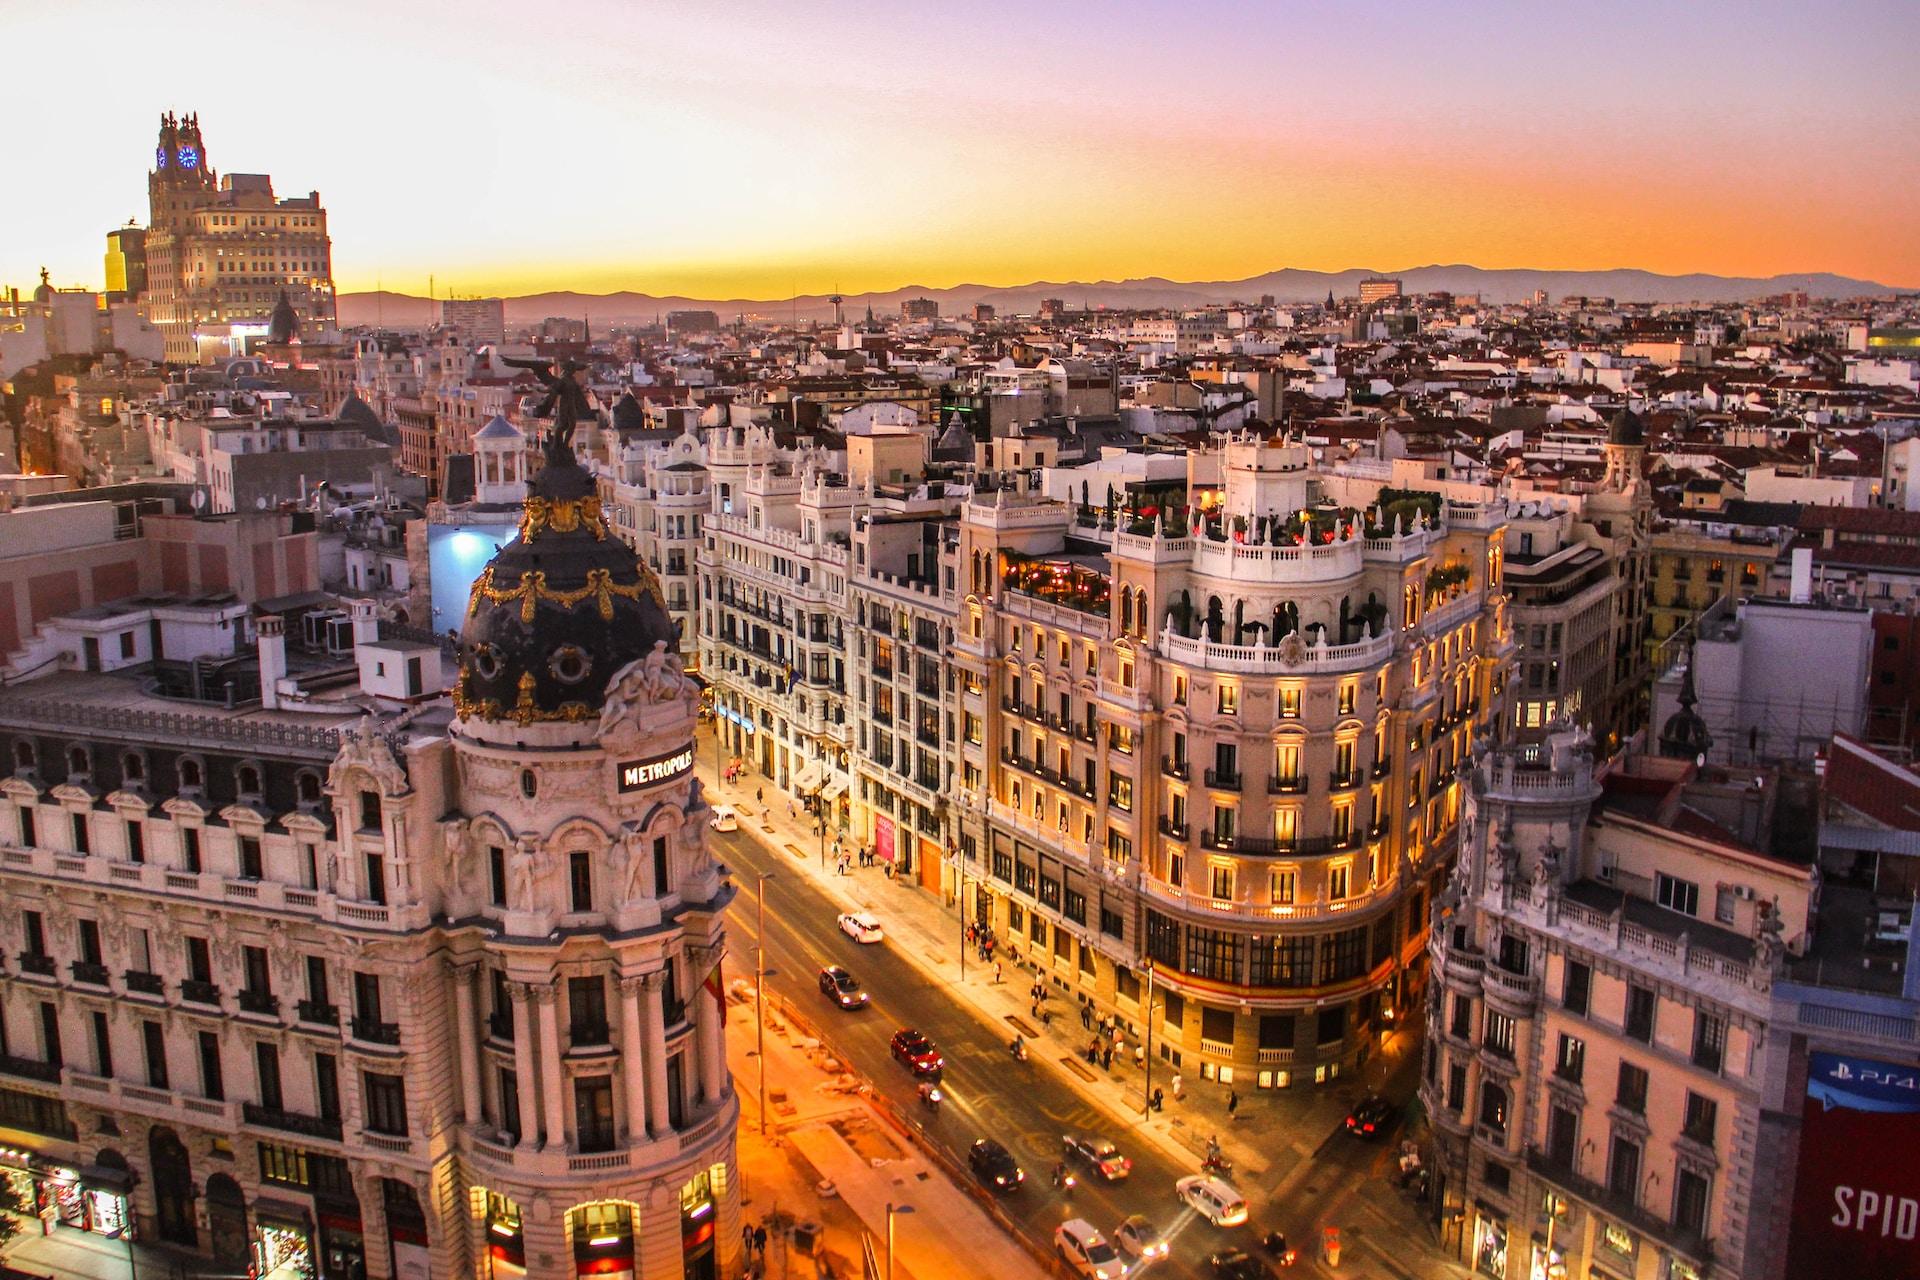 A Day in Madrid: 10 Essential Sights